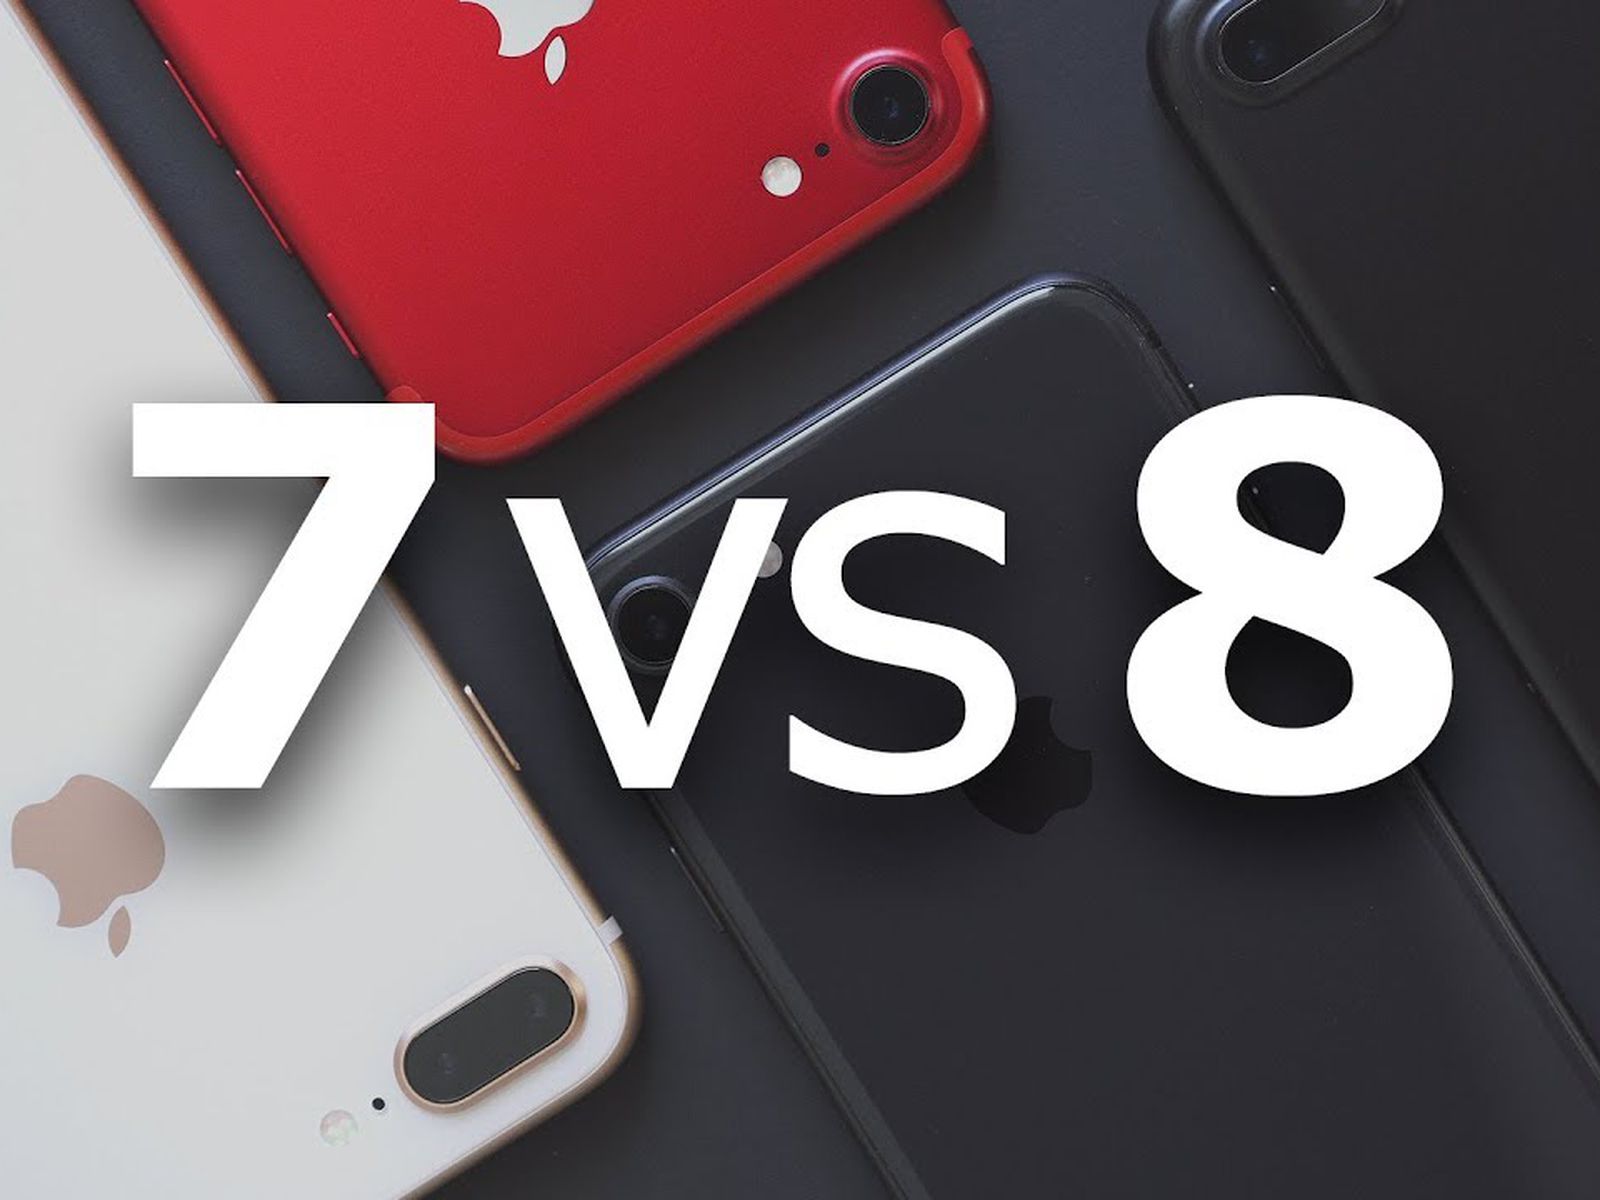 iPhone 8 Vs iPhone 7: What's The Difference?